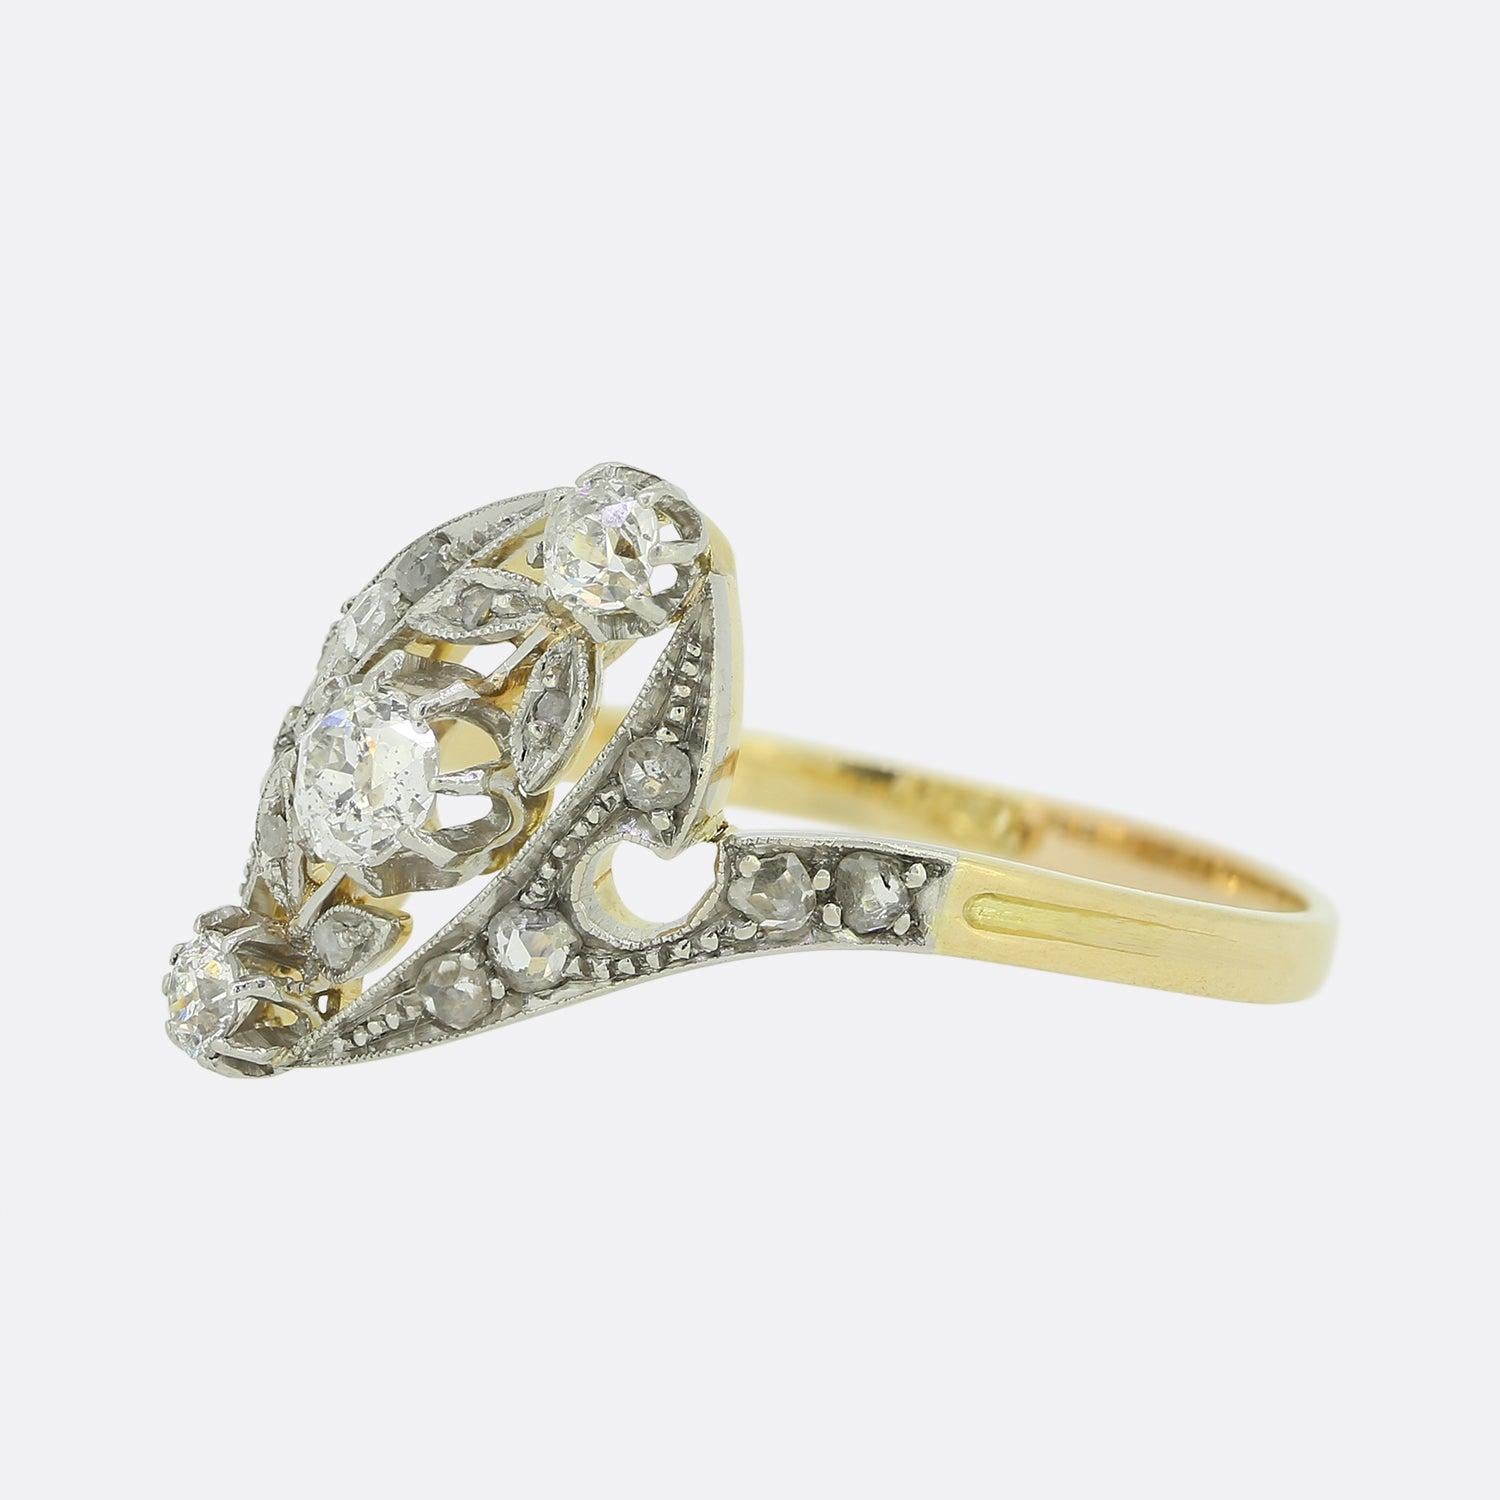 This is an Edwardian 18ct yellow gold and platinum diamond three stone twist ring. The ring features three old cut diamonds which have been claw set in platinum at the centre of two elegant crossover bands. The diamonds are well matched for colour